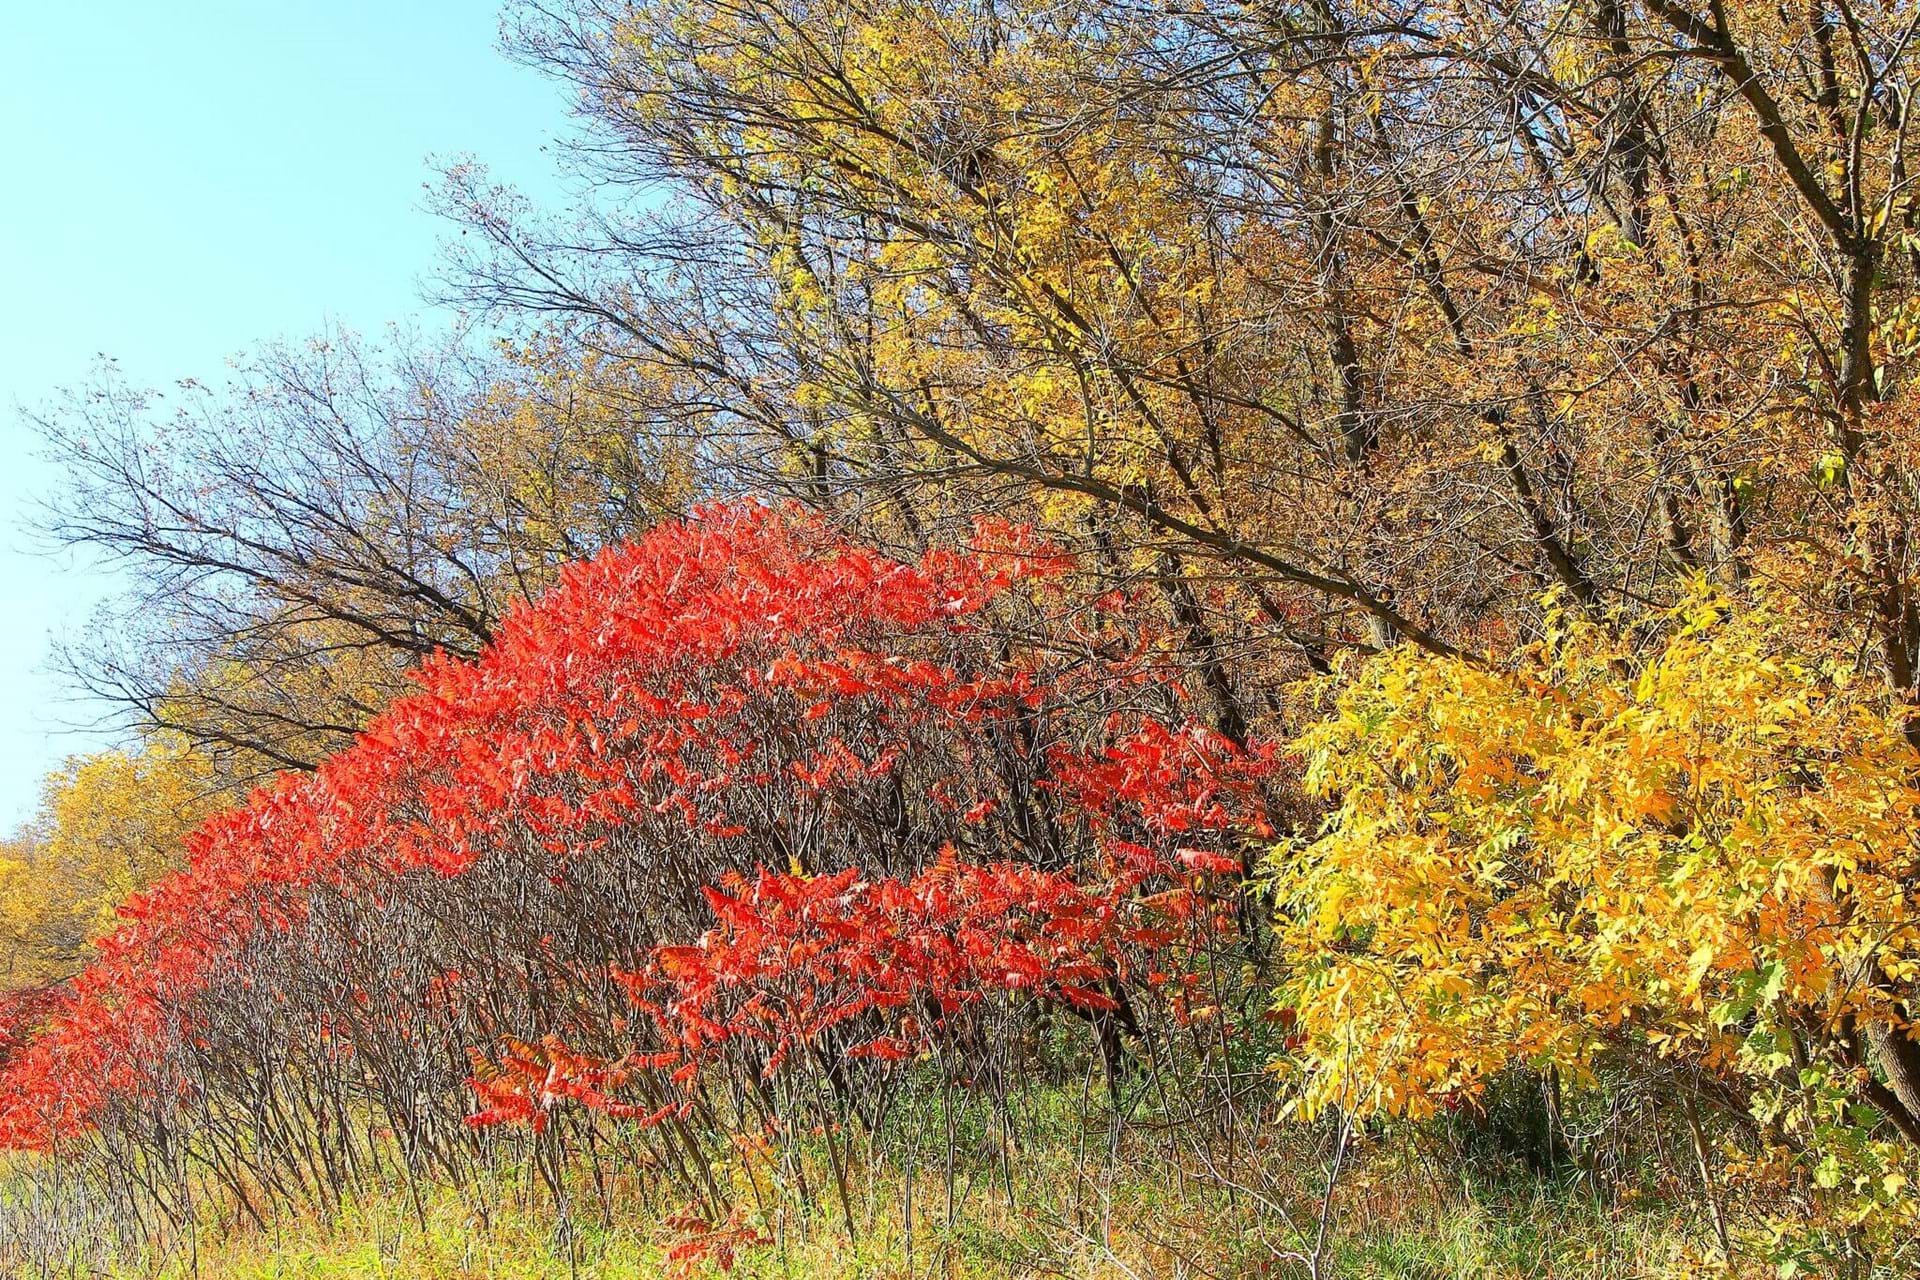 Some red and orange trees on a hill